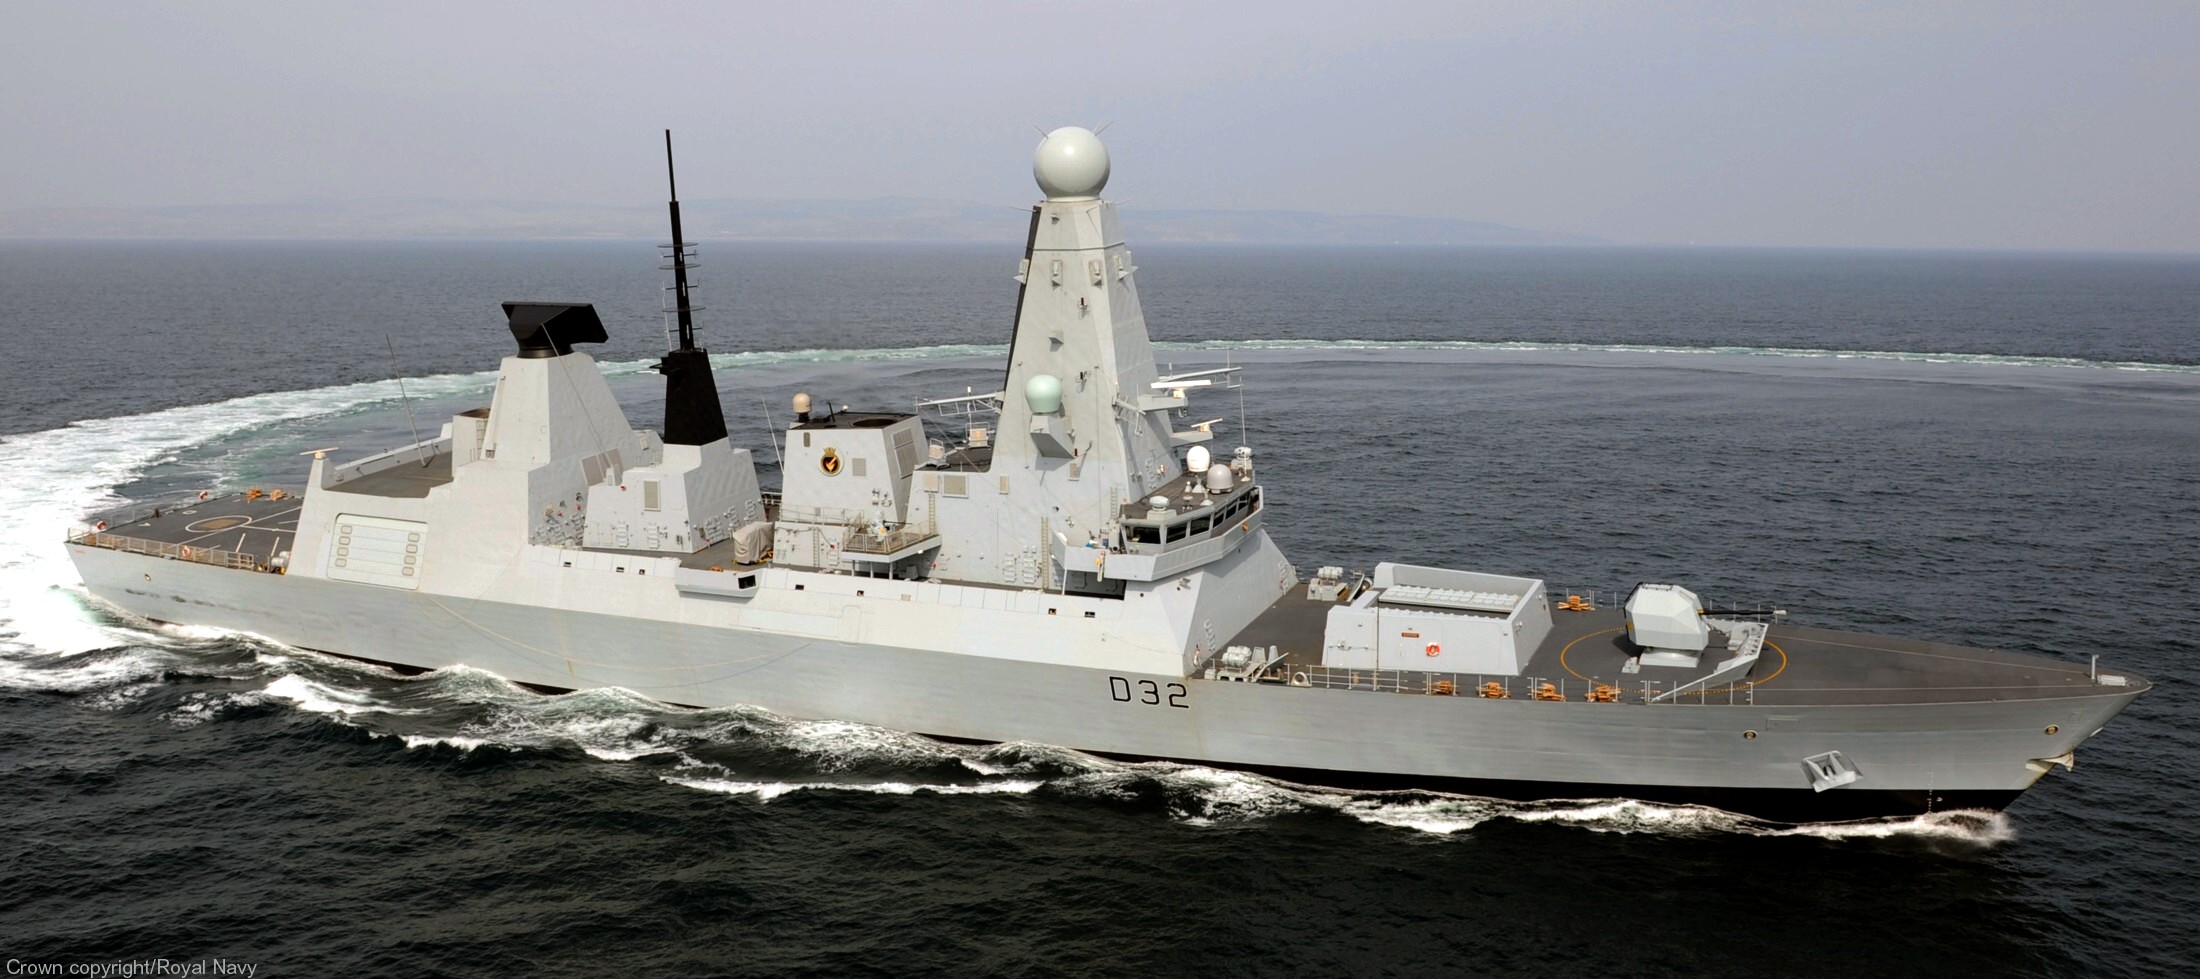 hms daring d-32 type 45 class guided missile destroyer royal navy sea viper paams 36